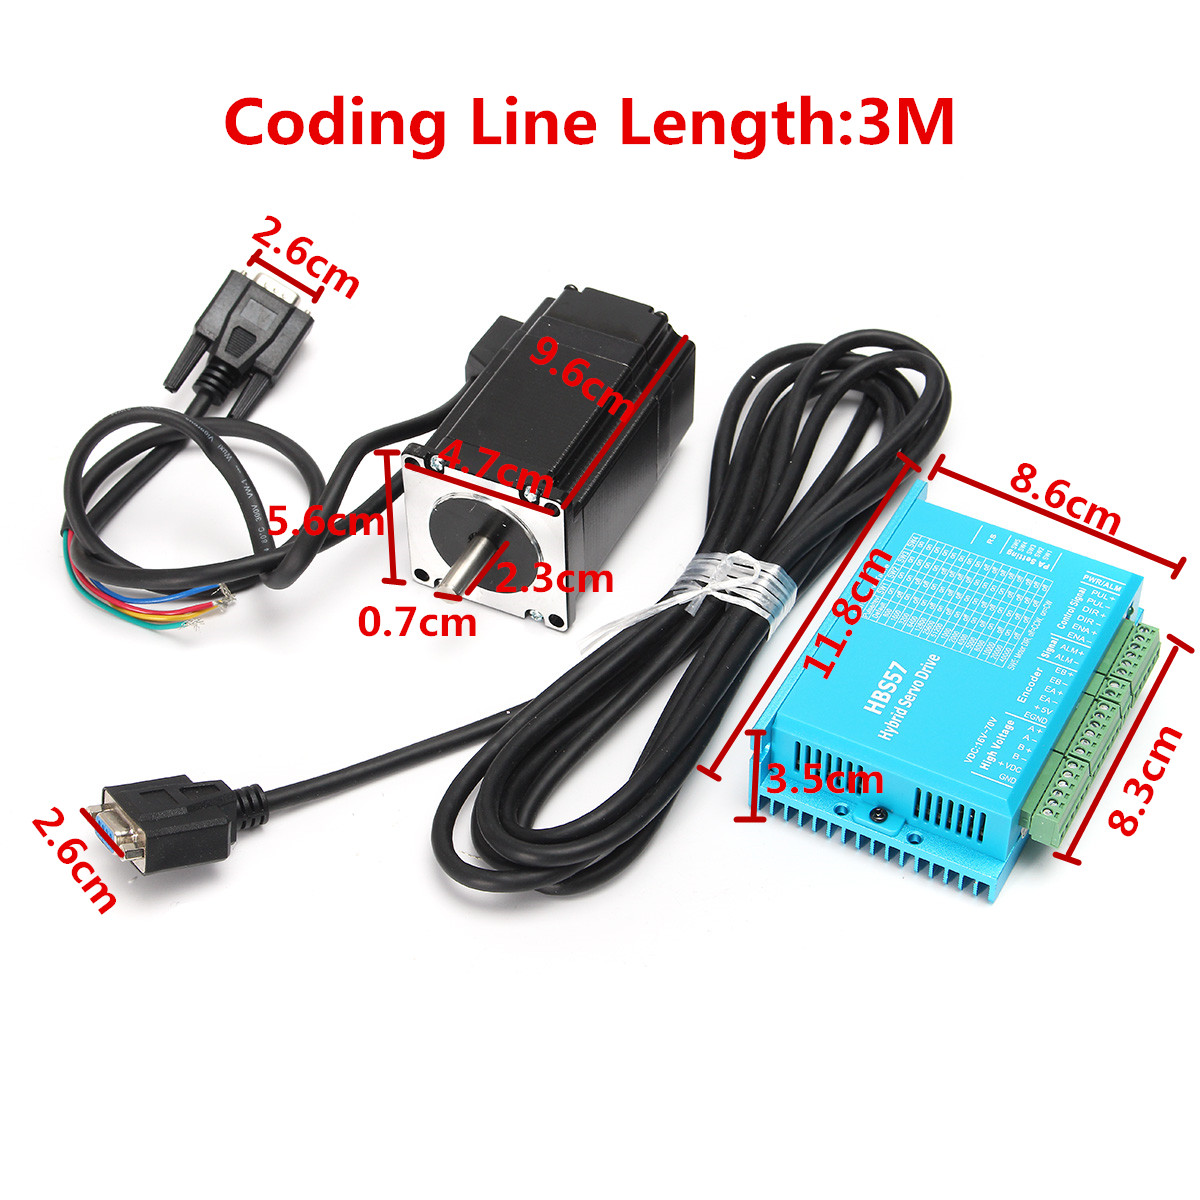 High Speed Closed Loop Stepper Motor + HBS57 Stepper Driver + Coding Cable Kit 14